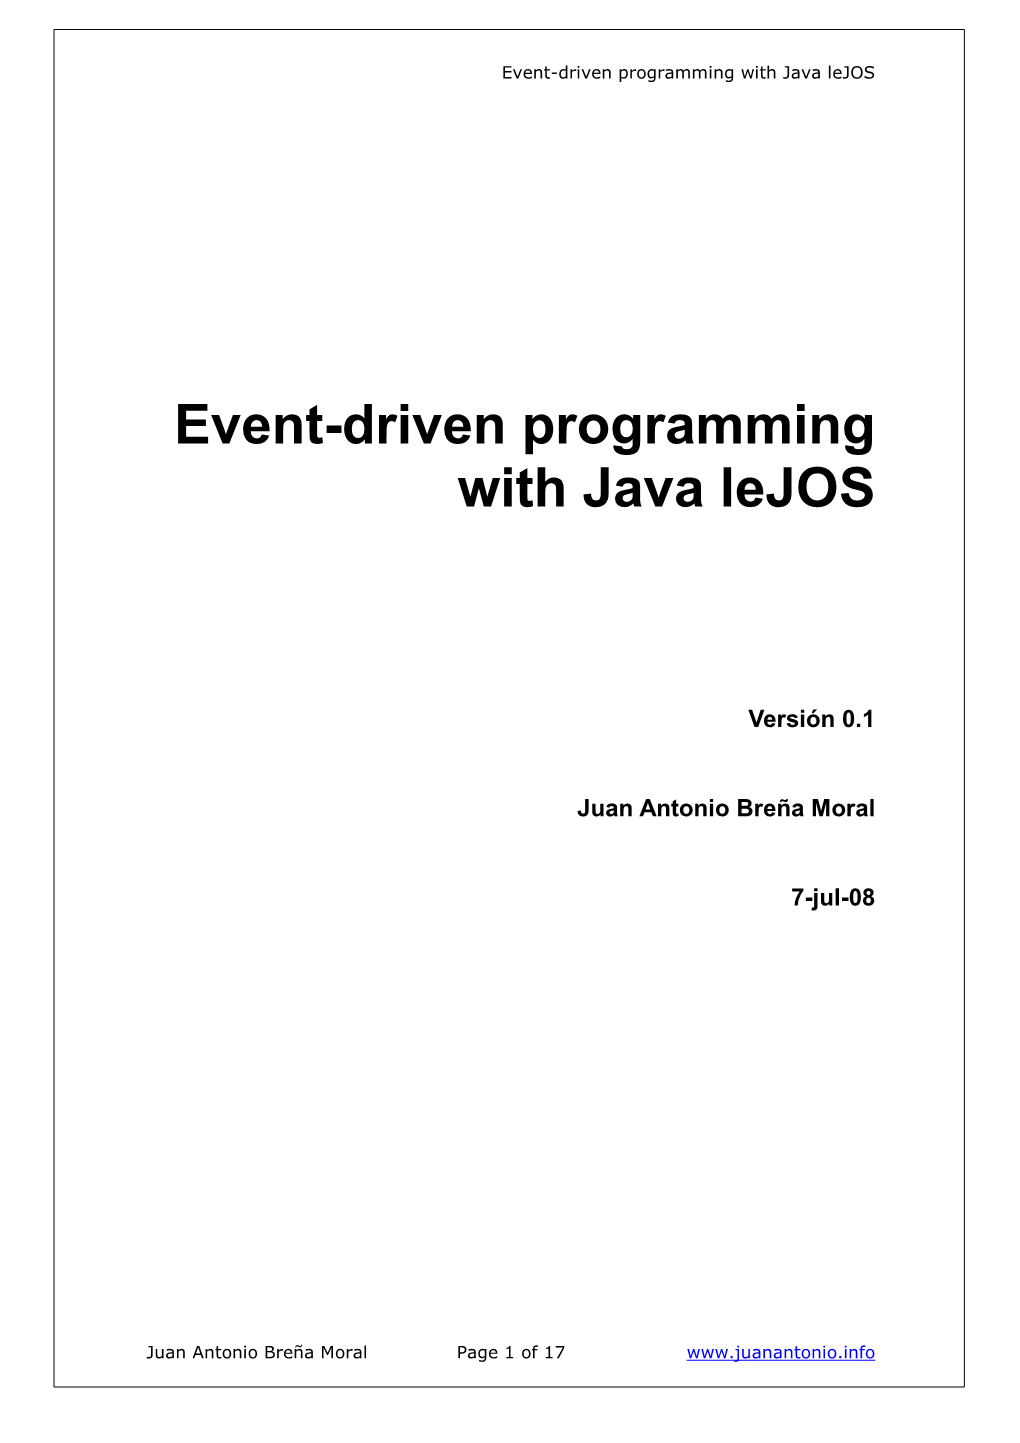 Event-Driven Programming with Java Lejos